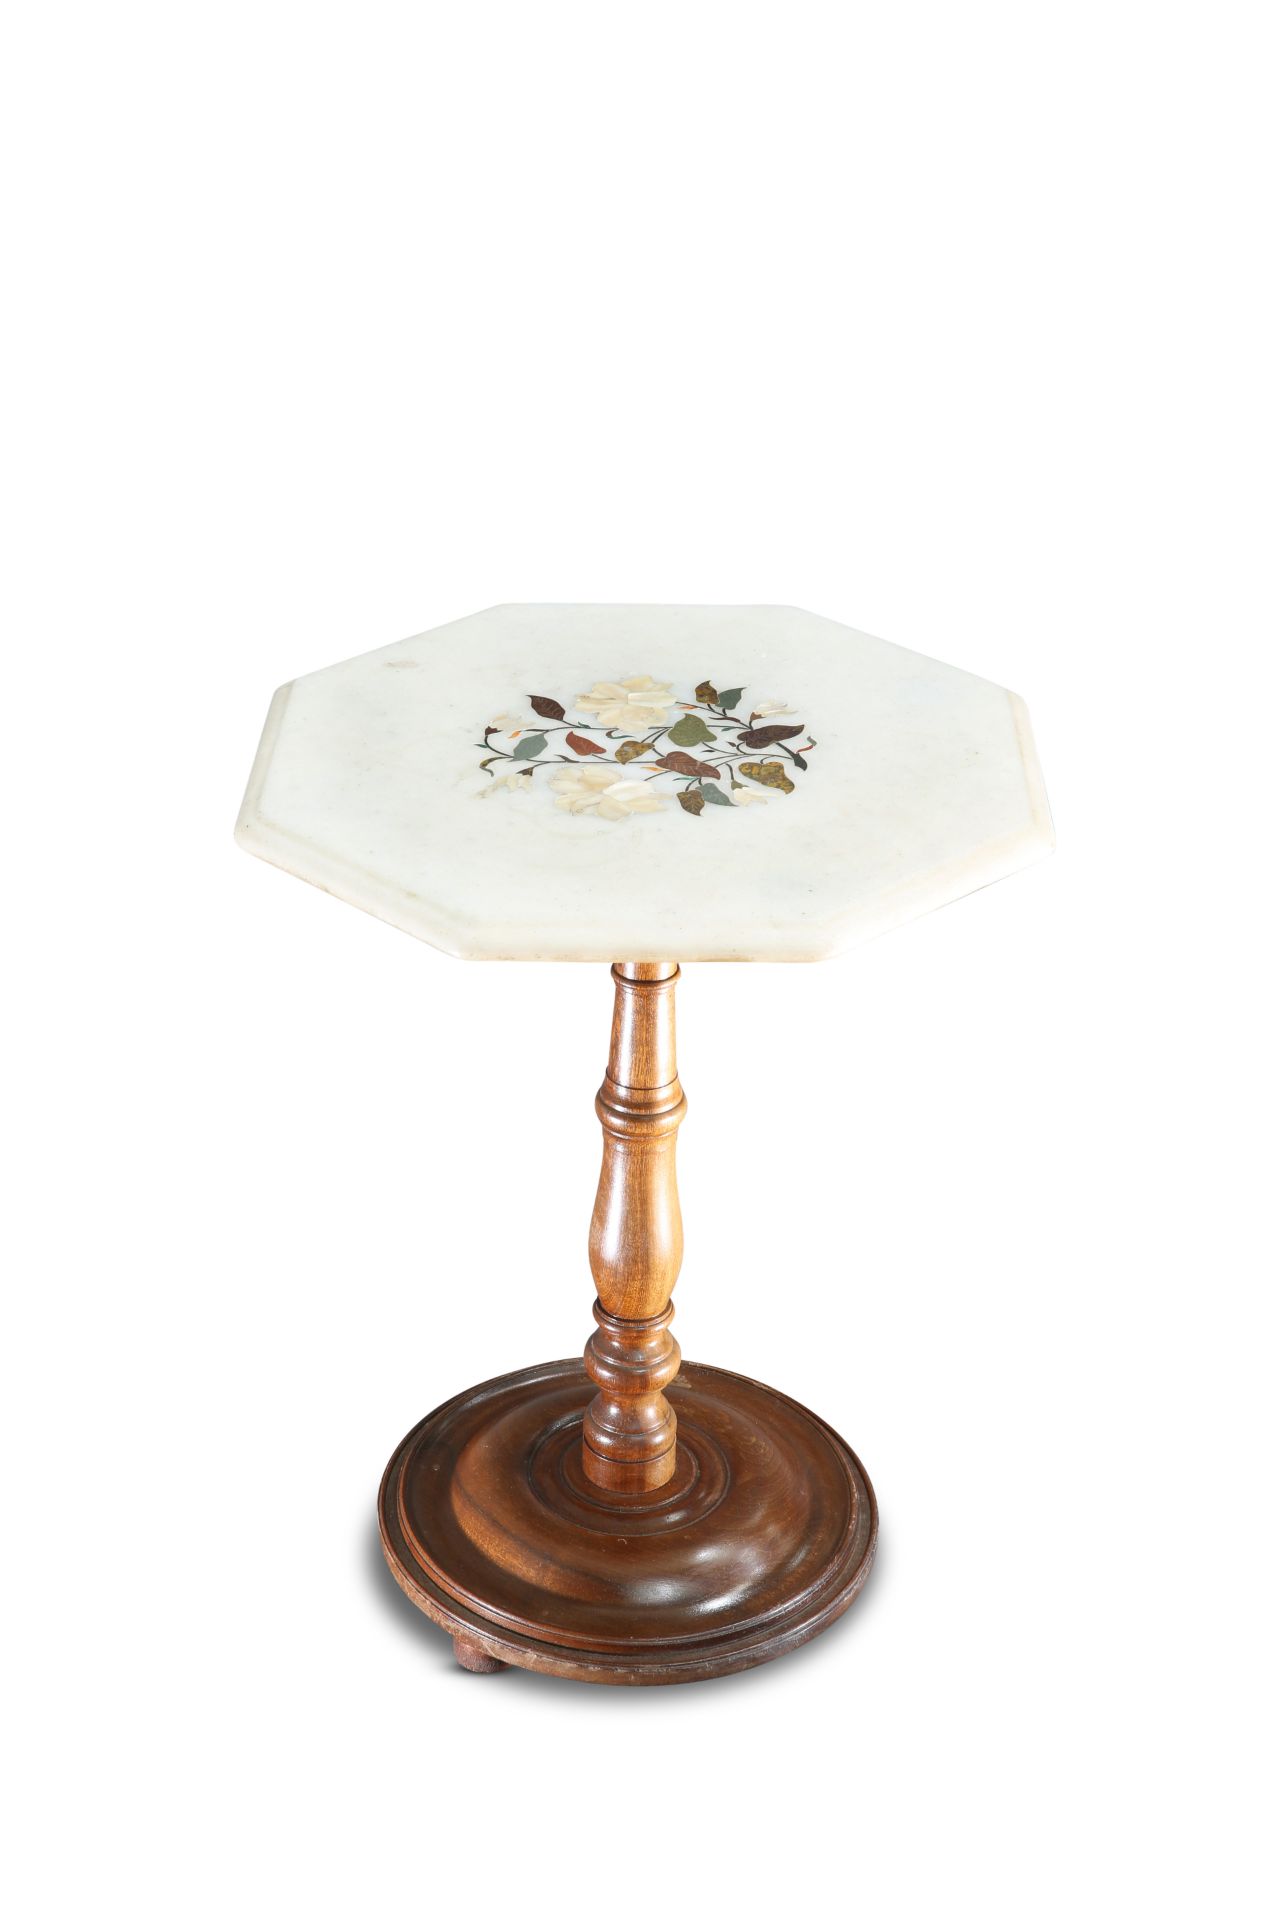 A PIETRA DURA OCCASIONAL TABLE, 19TH CENTURY